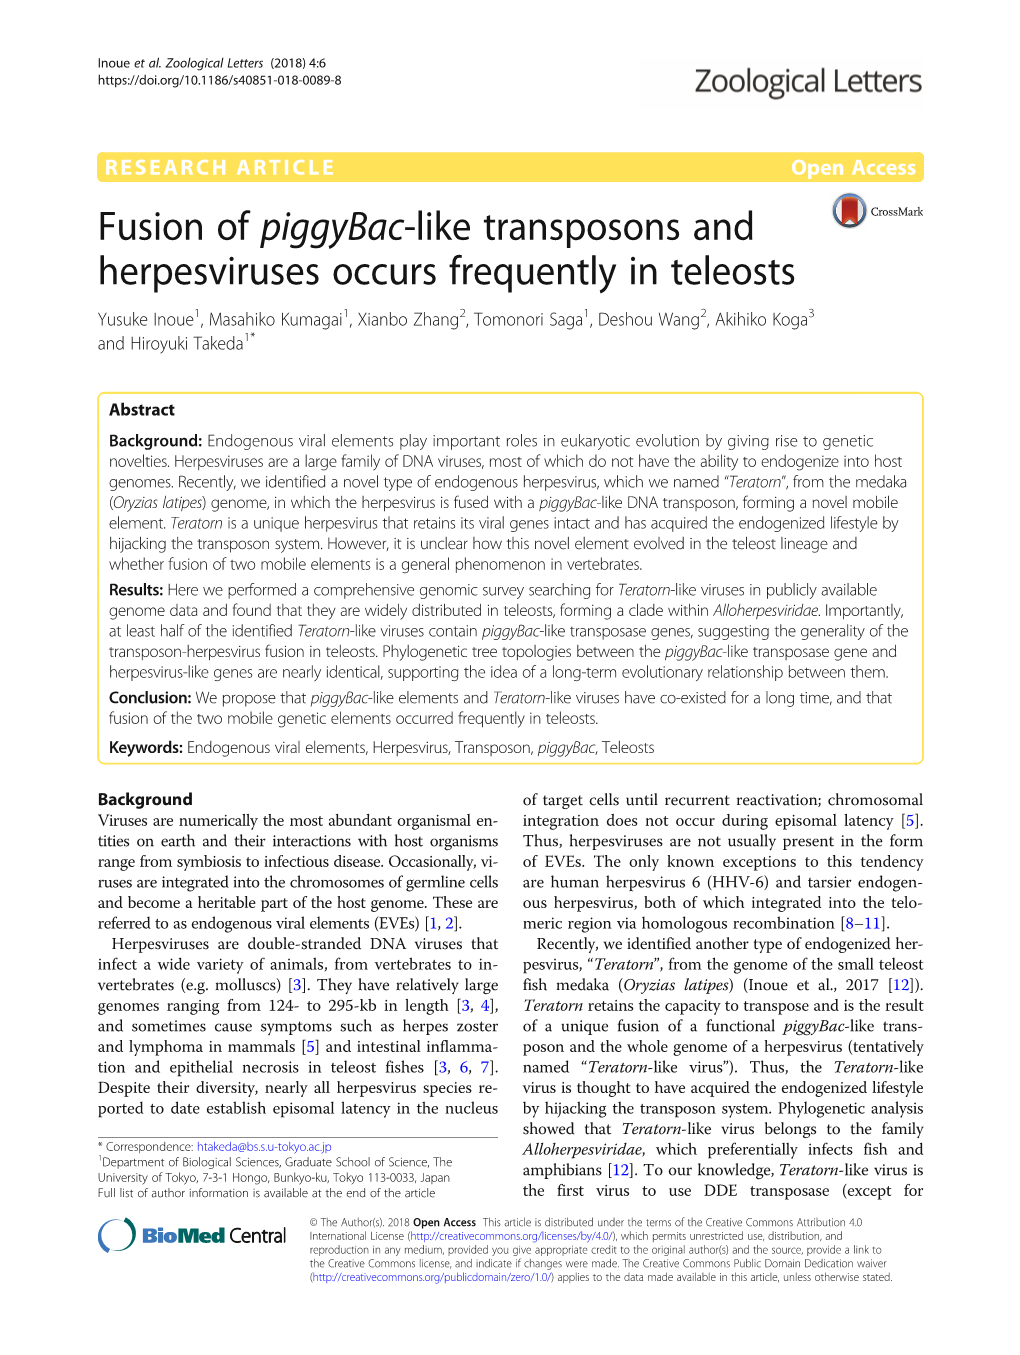 Fusion of Piggybac-Like Transposons and Herpesviruses Occurs